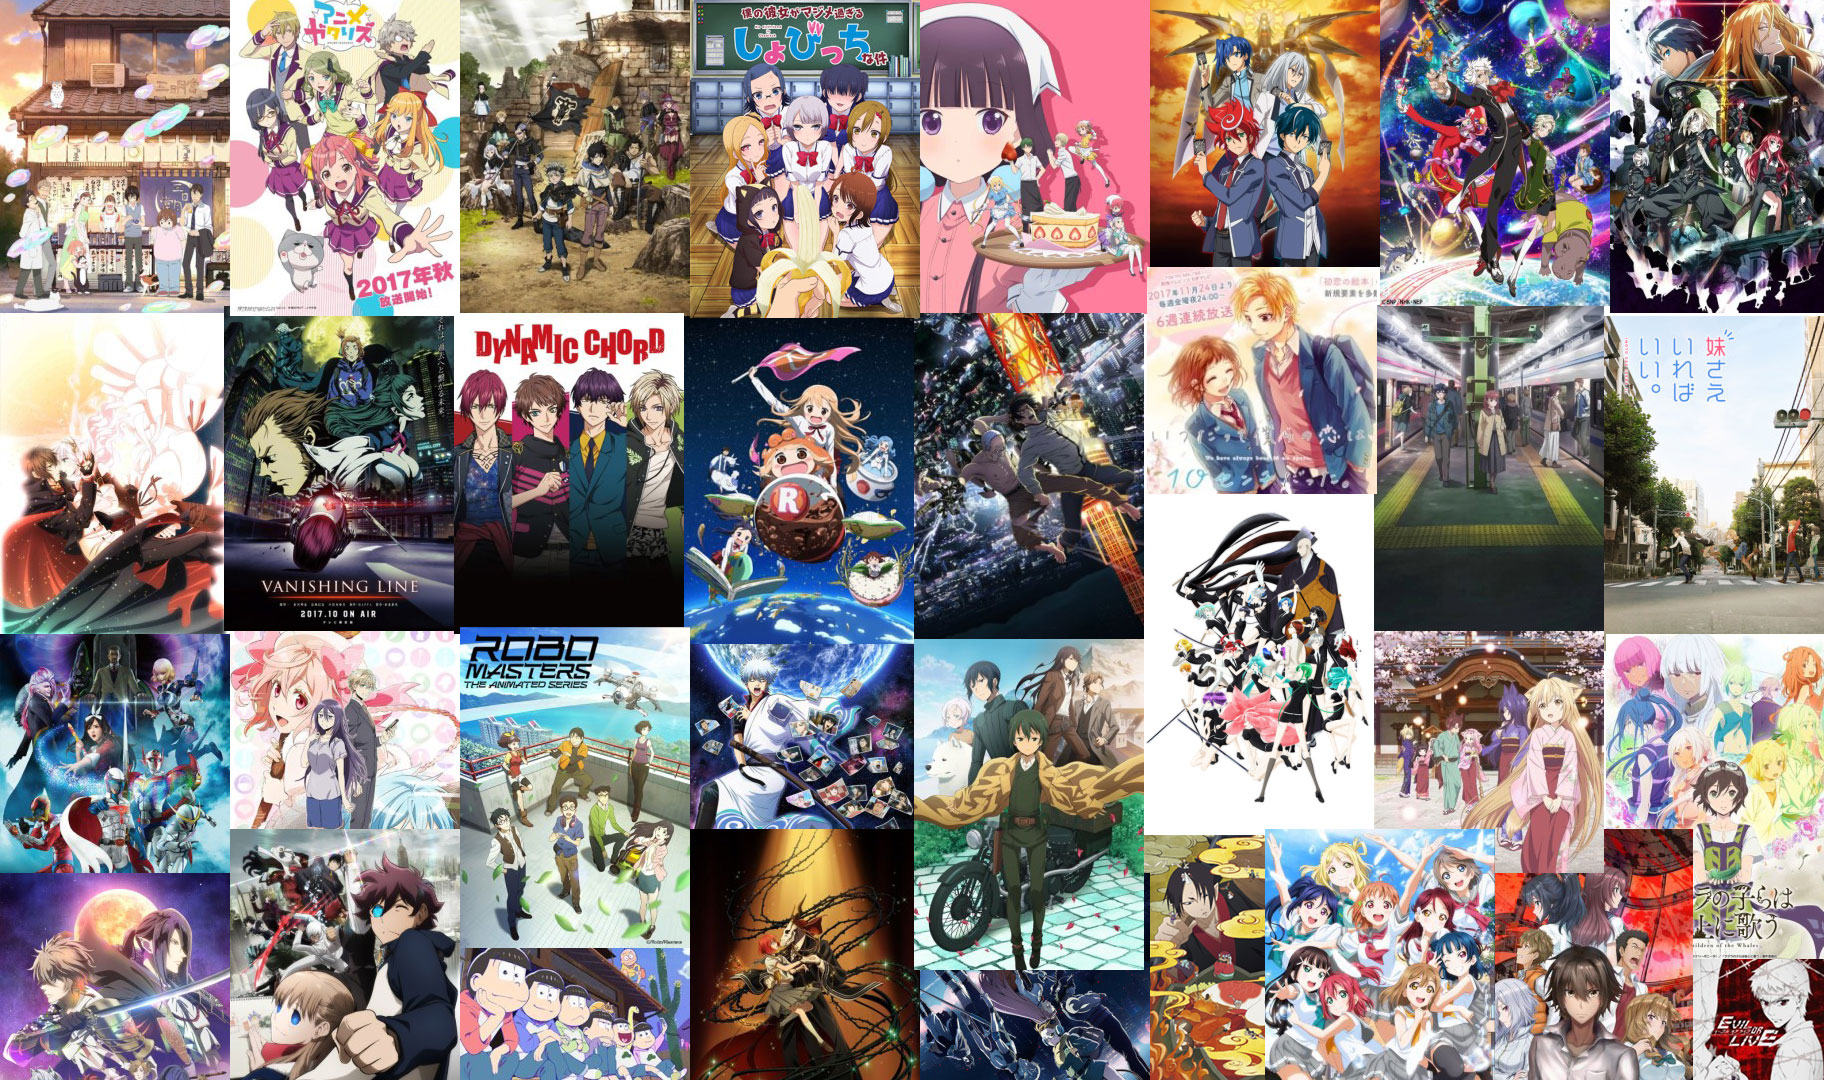 ANIME RECOMMENDATIONS  30K on Instagram Here is my Watchlist of the  Spring anime season    𝘕𝘦𝘸 𝘗𝘰𝘴𝘵  𝘏𝘰𝘱𝘦 𝘺𝘰𝘶 𝘦𝘯𝘫𝘰𝘺 𝘪𝘵